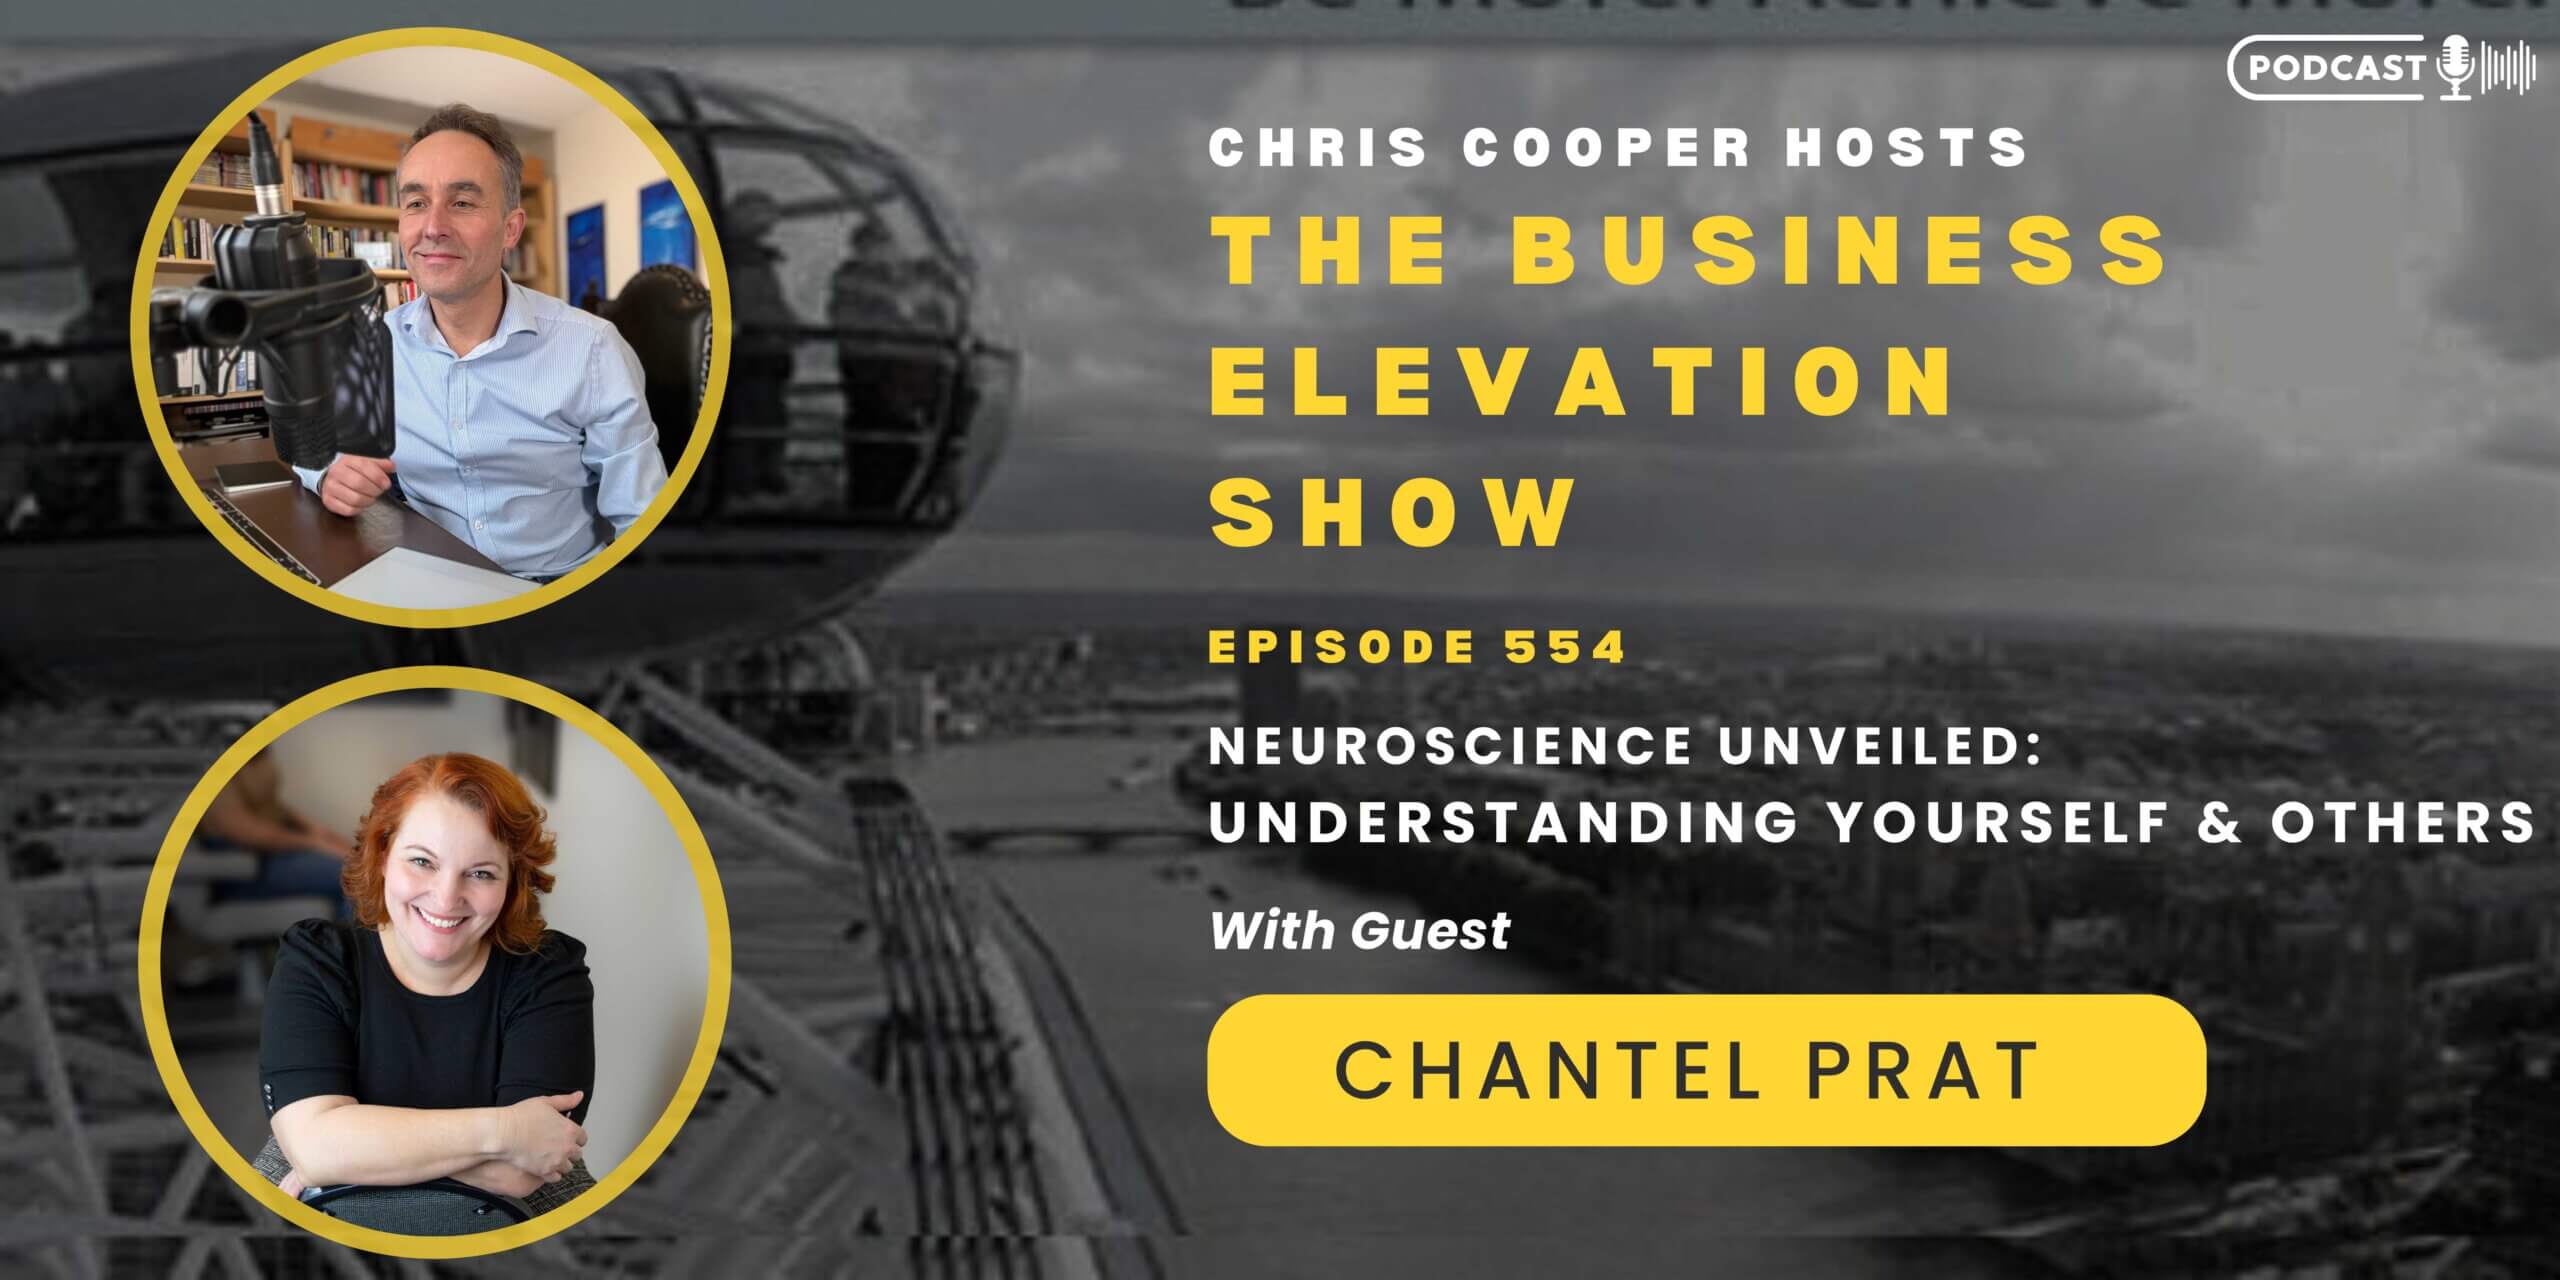 Banner of The Business Elevation Show Episode 554 on Neuroscience Unveiled: Understanding Yourself and Others with Chris Cooper and Chantel Prat